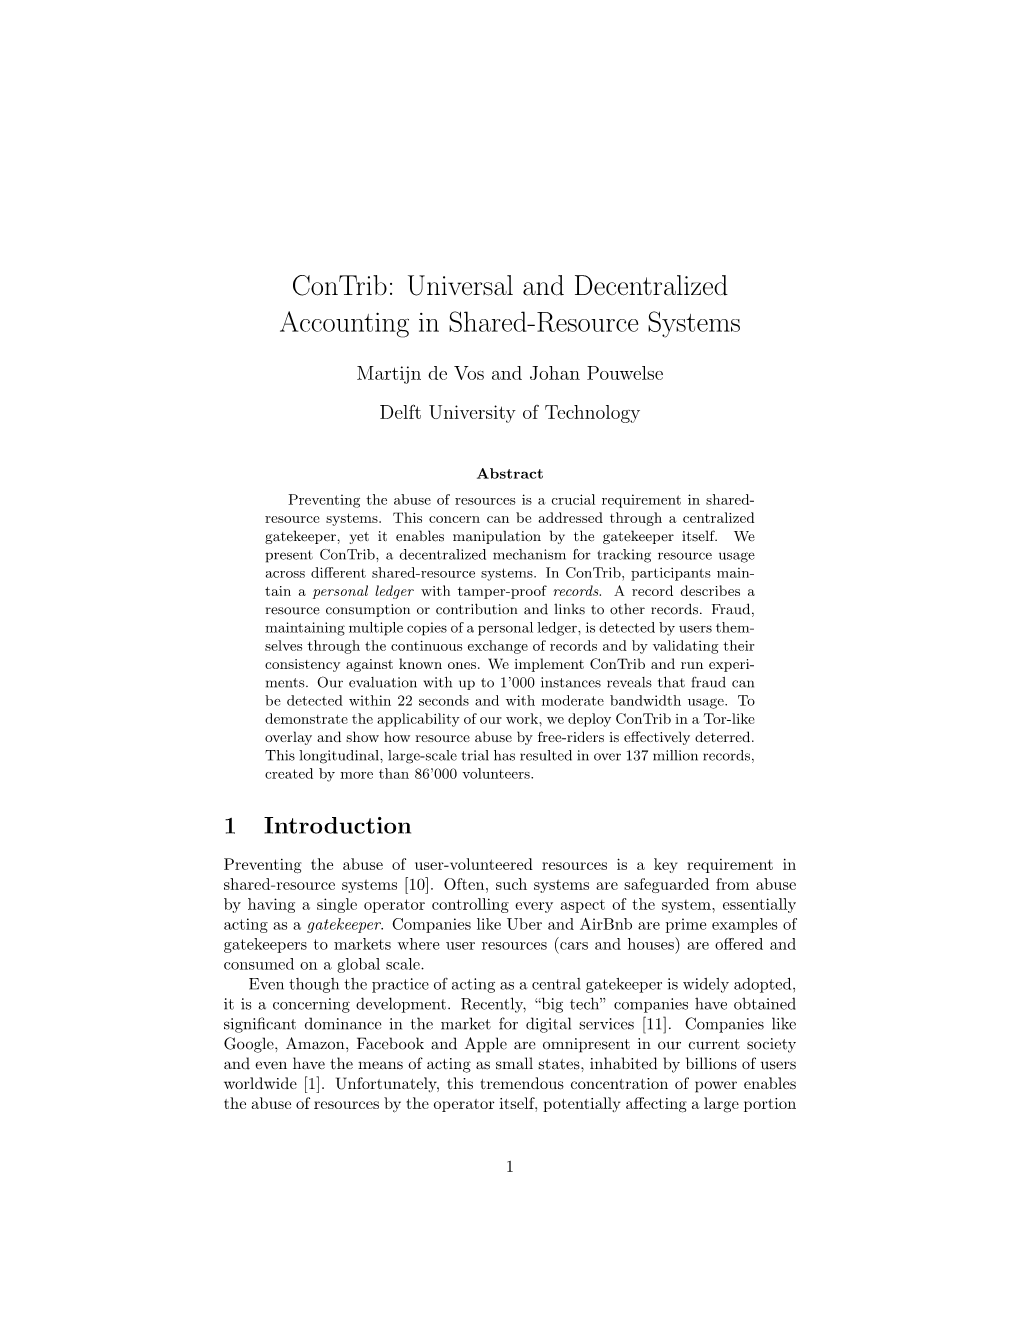 Universal and Decentralized Accounting in Shared-Resource Systems